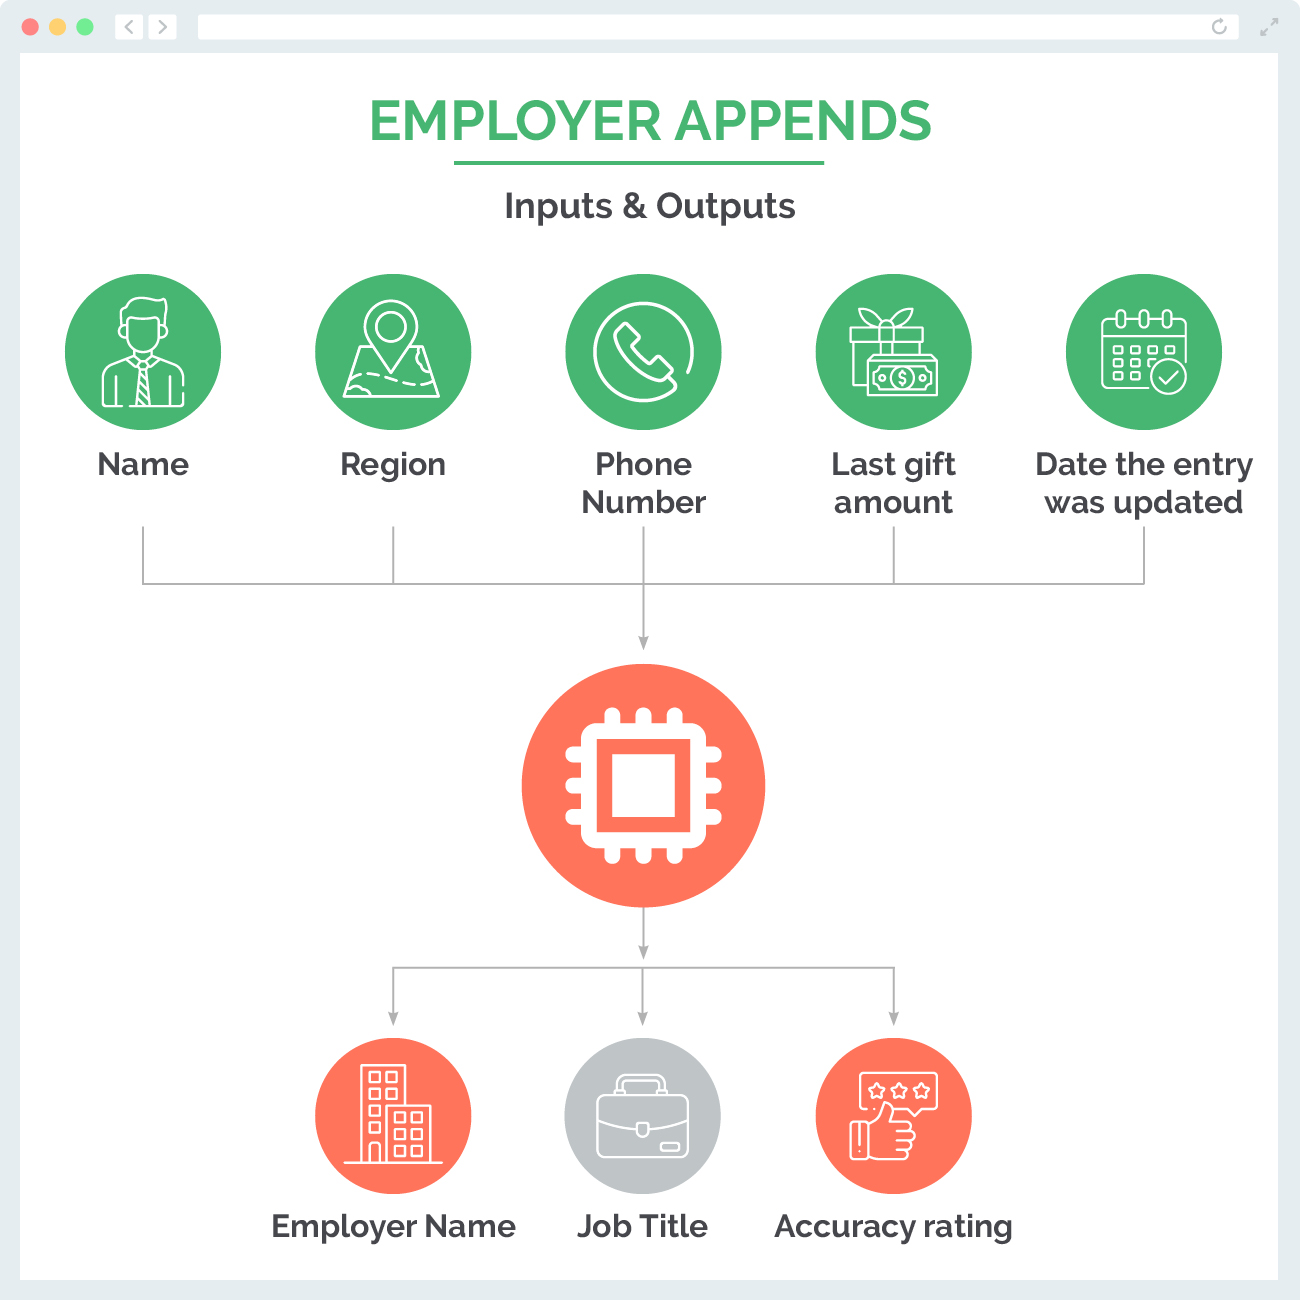 Employer appends - inputs and outputs